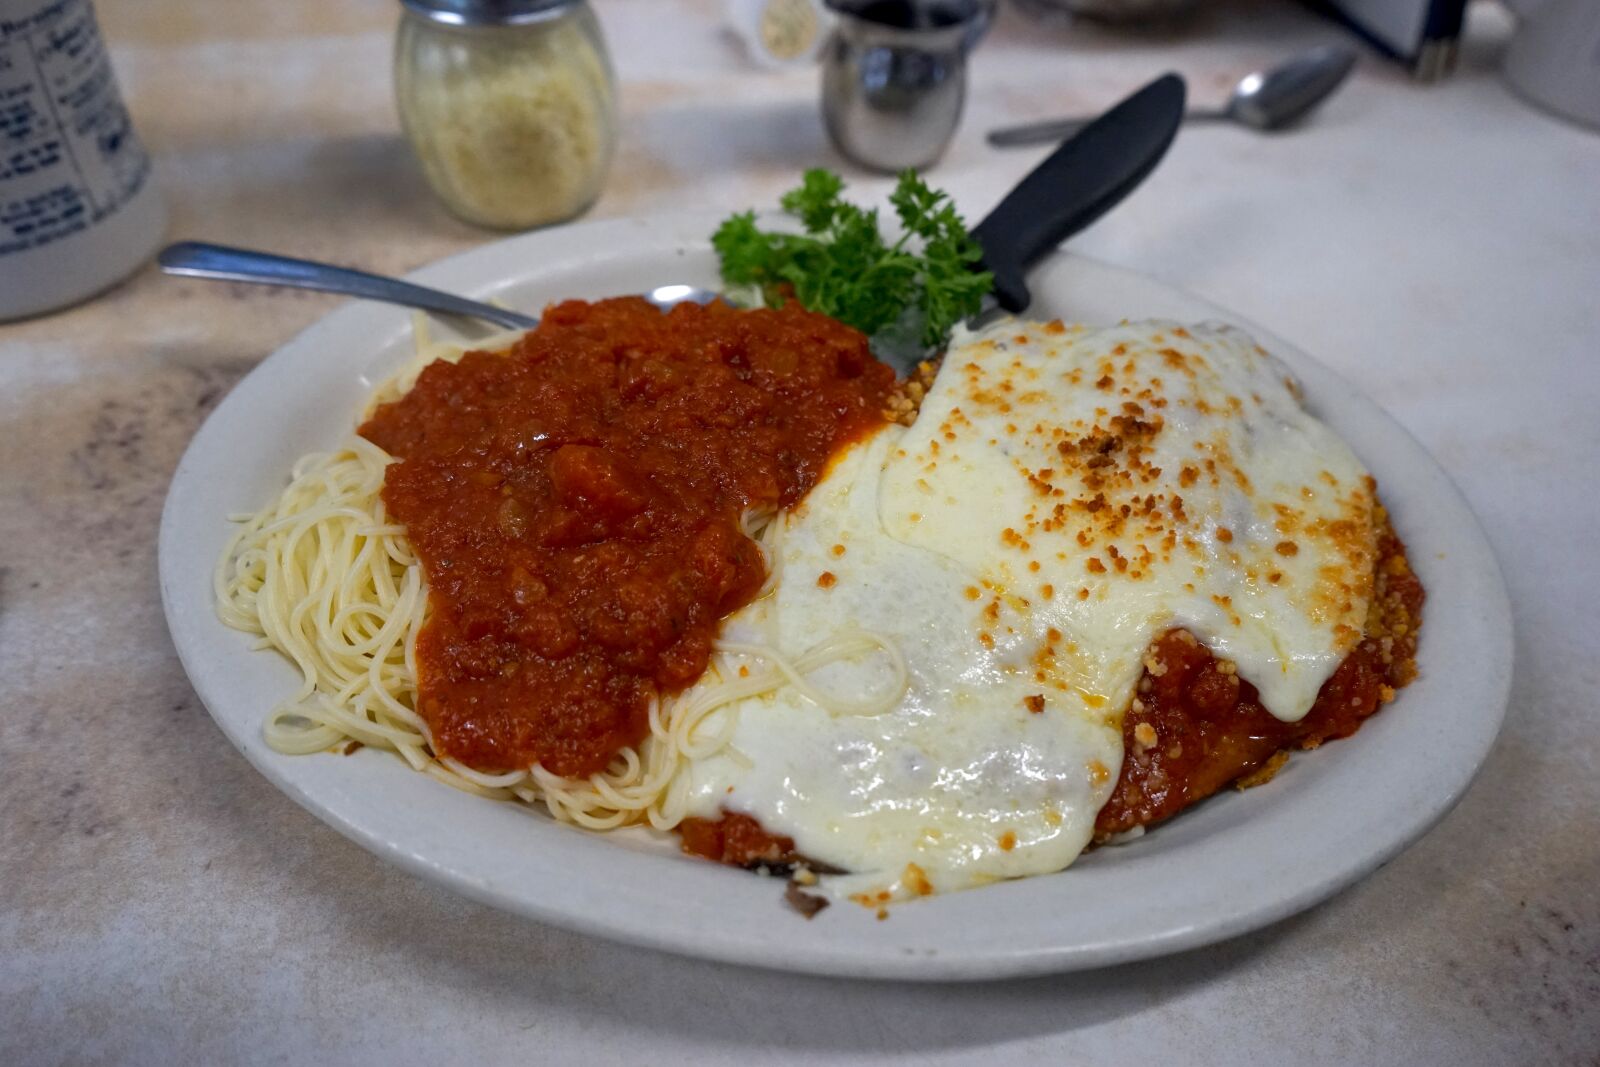 Sony a7 sample photo. Chicken parmesan, diner food photography